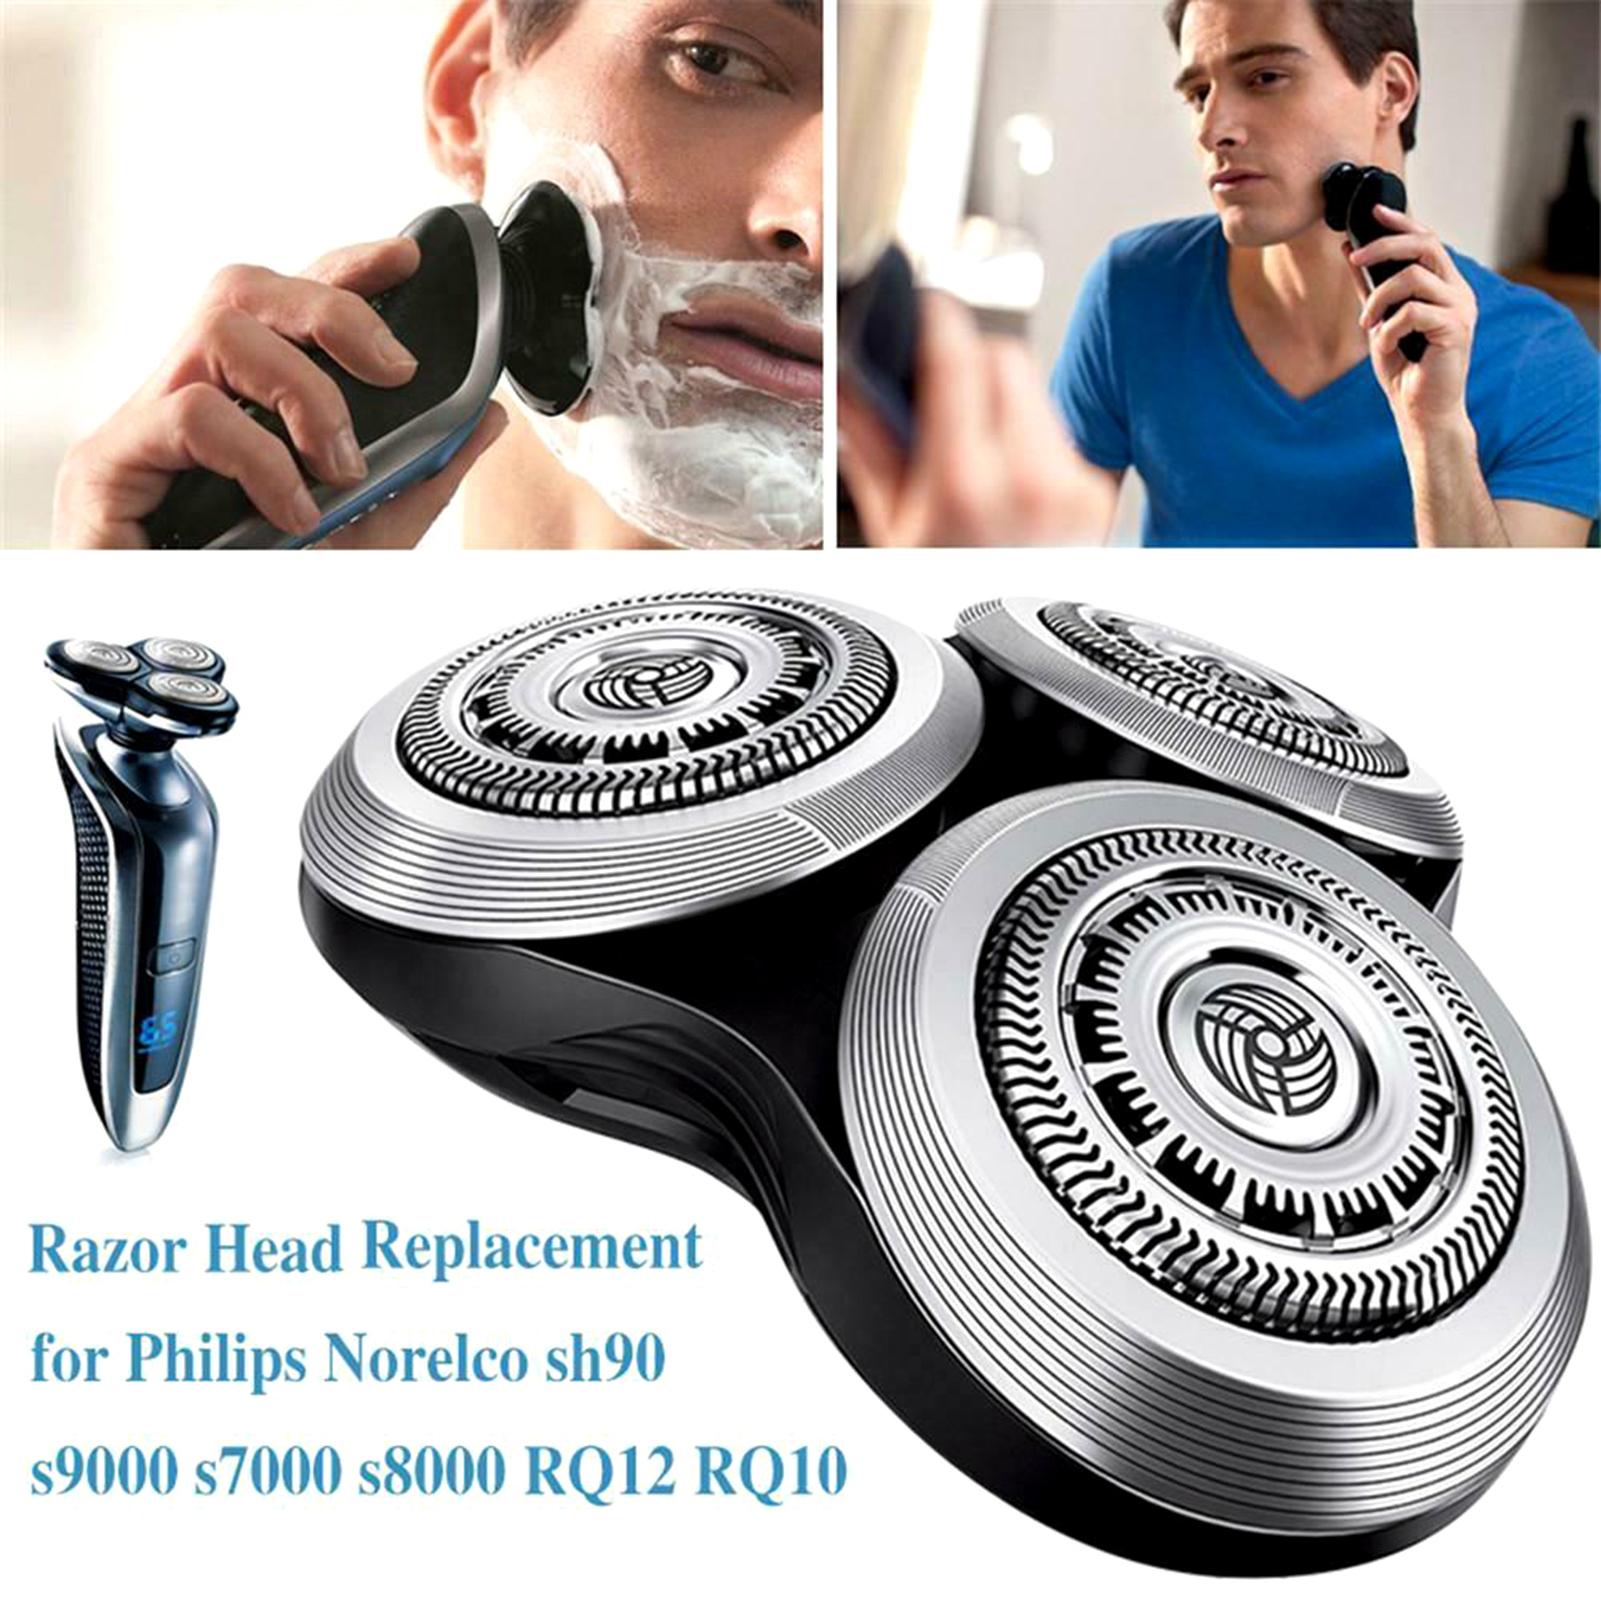 Shaving-Blade Replacement Electric Shavers Blade-Heads Replacement for Philips No-relco SH90/52 S7000 S9000